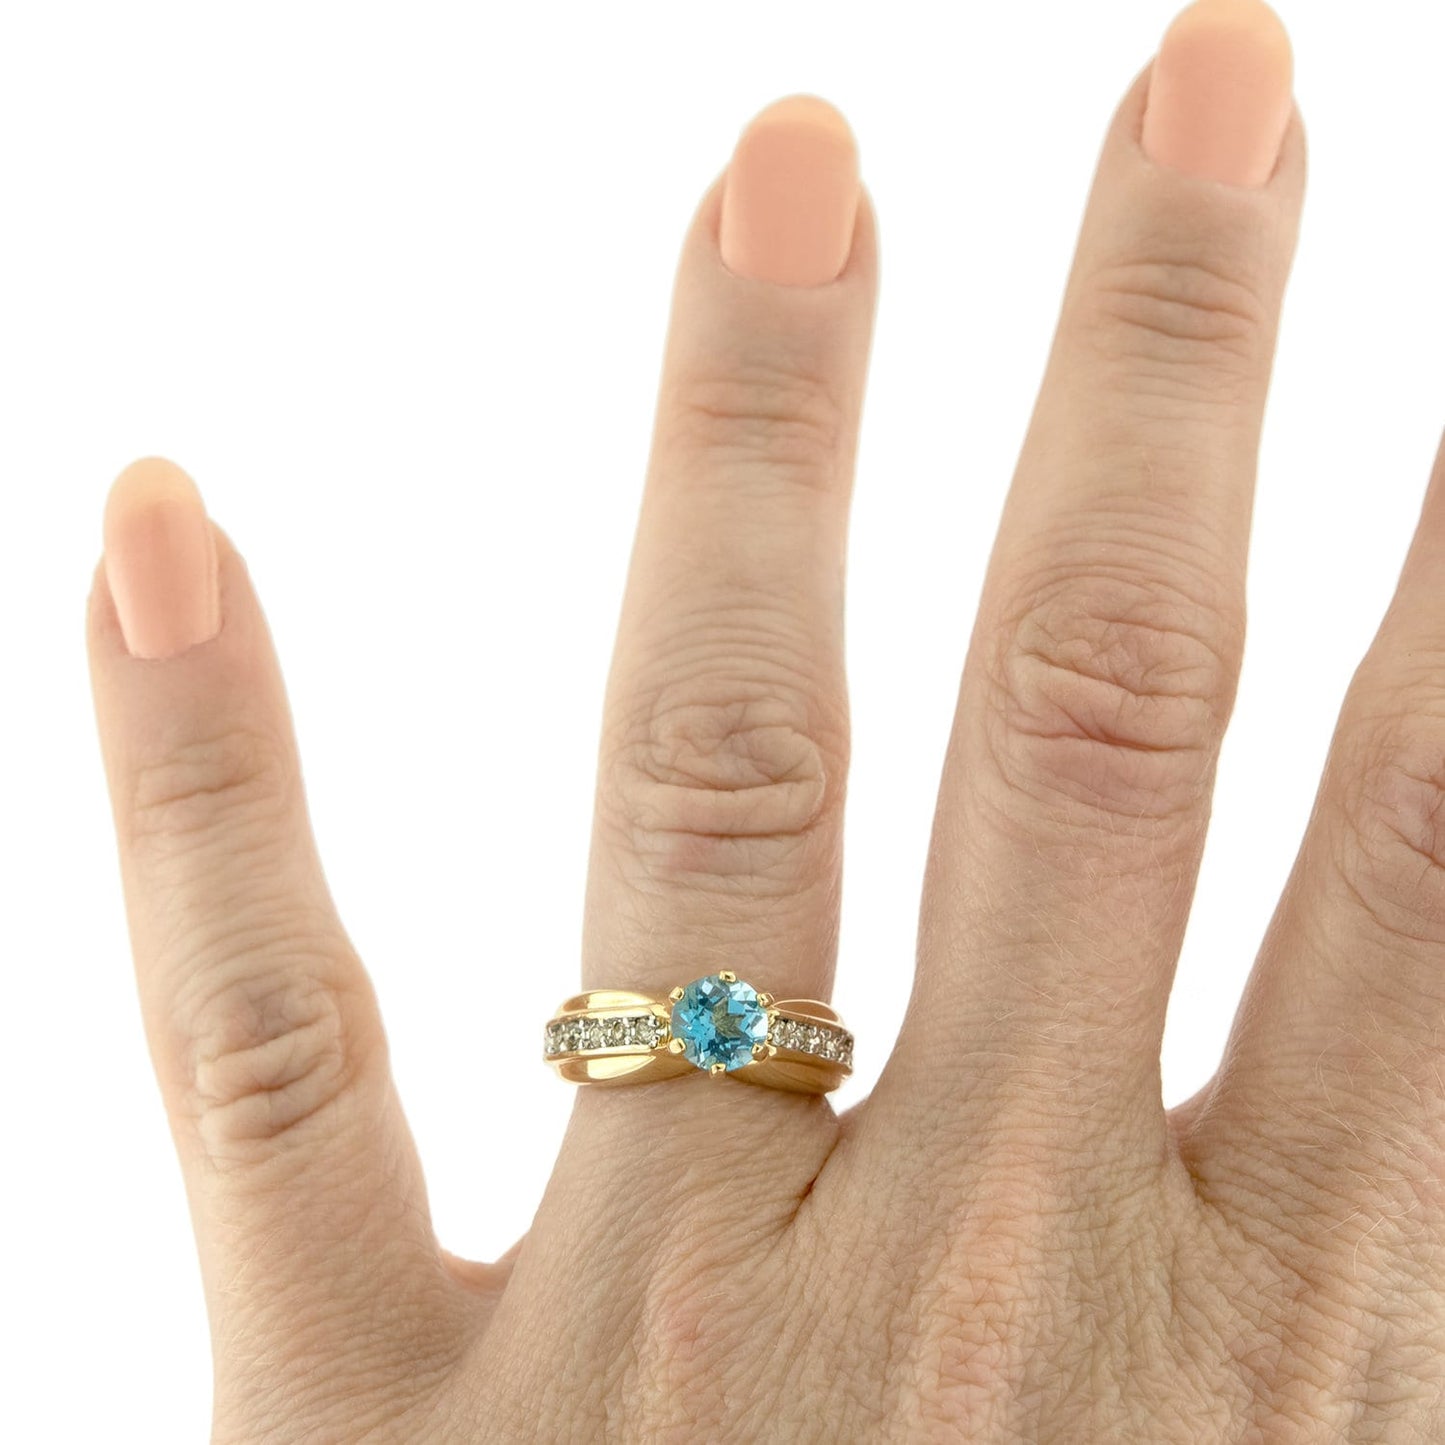 Vintage Ring Genuine Blue Topaz and Clear Swarovski Crystals 18kt Gold Plated R2736 - Limited Stock - Never Worn